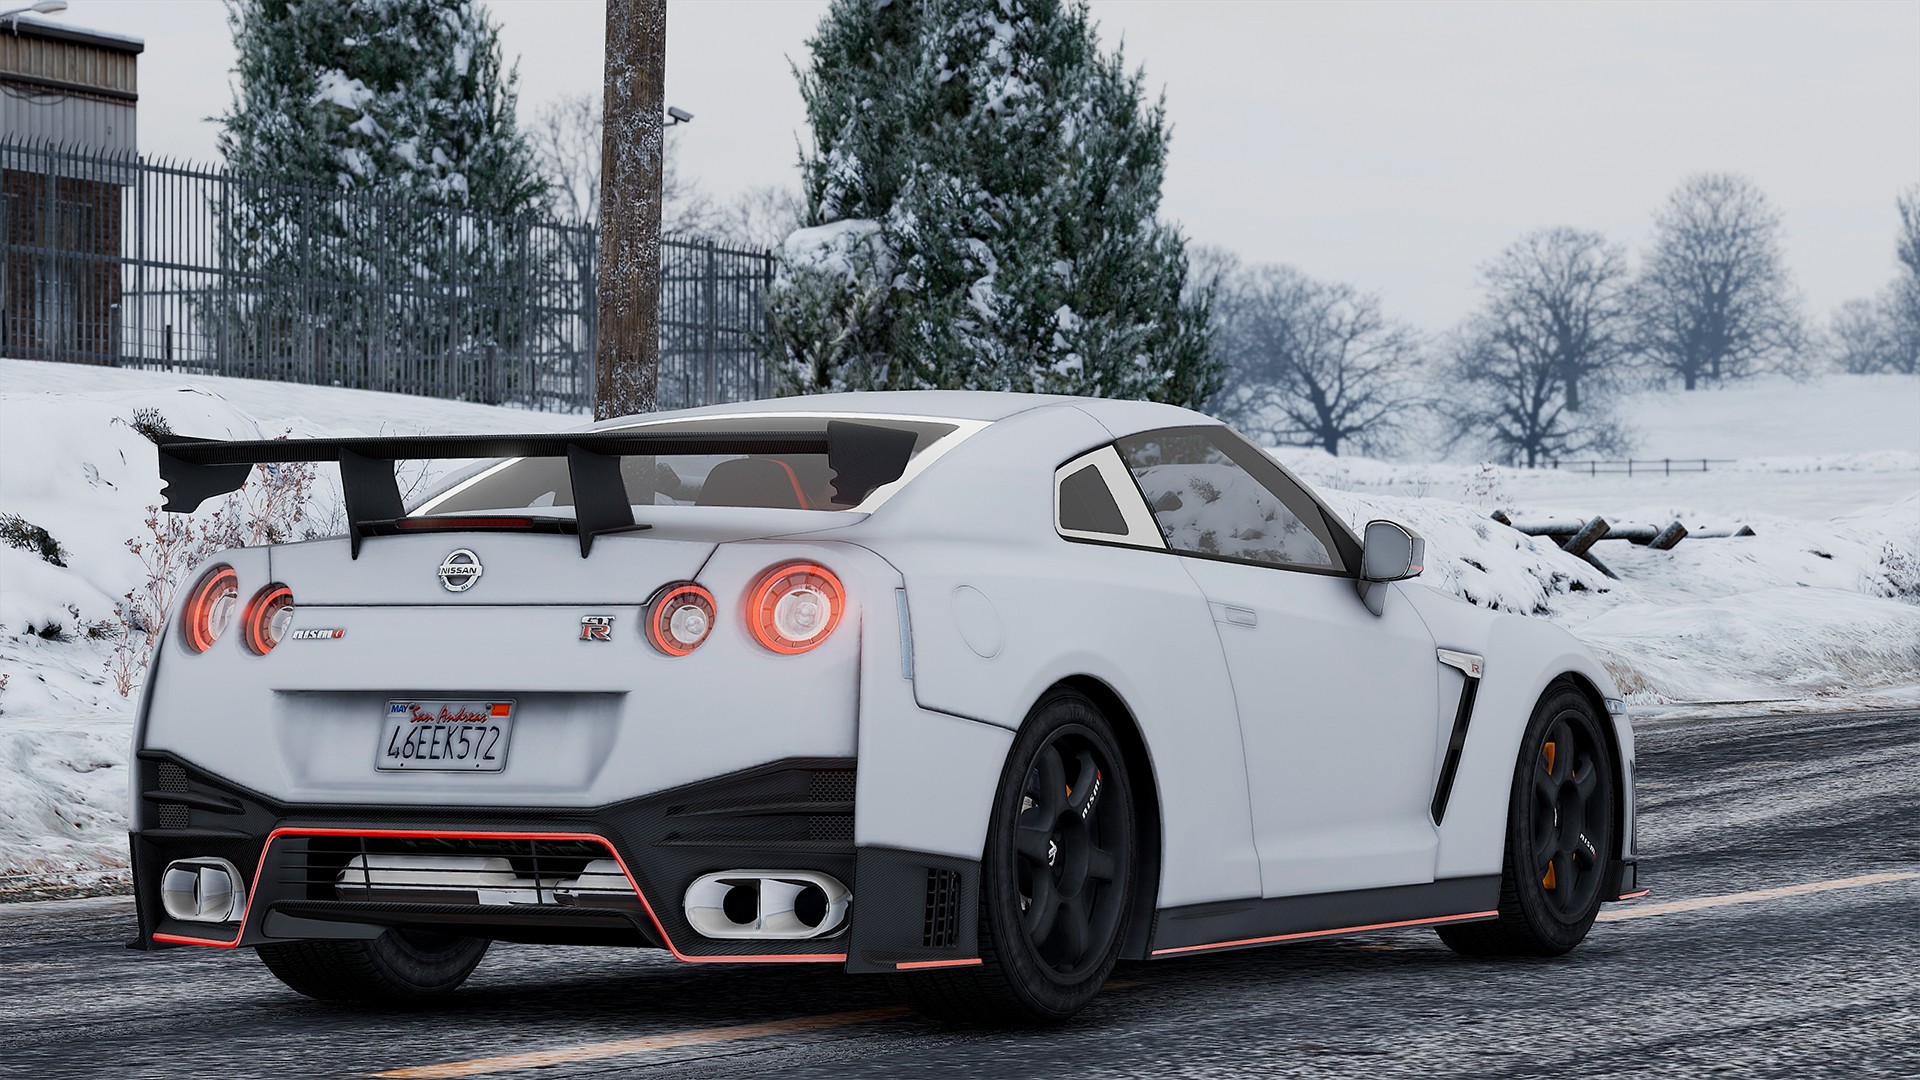 General 1920x1080 car Nissan GT-R Nissan GT-R NISMO Nissan vehicle snow outdoors white cars numbers